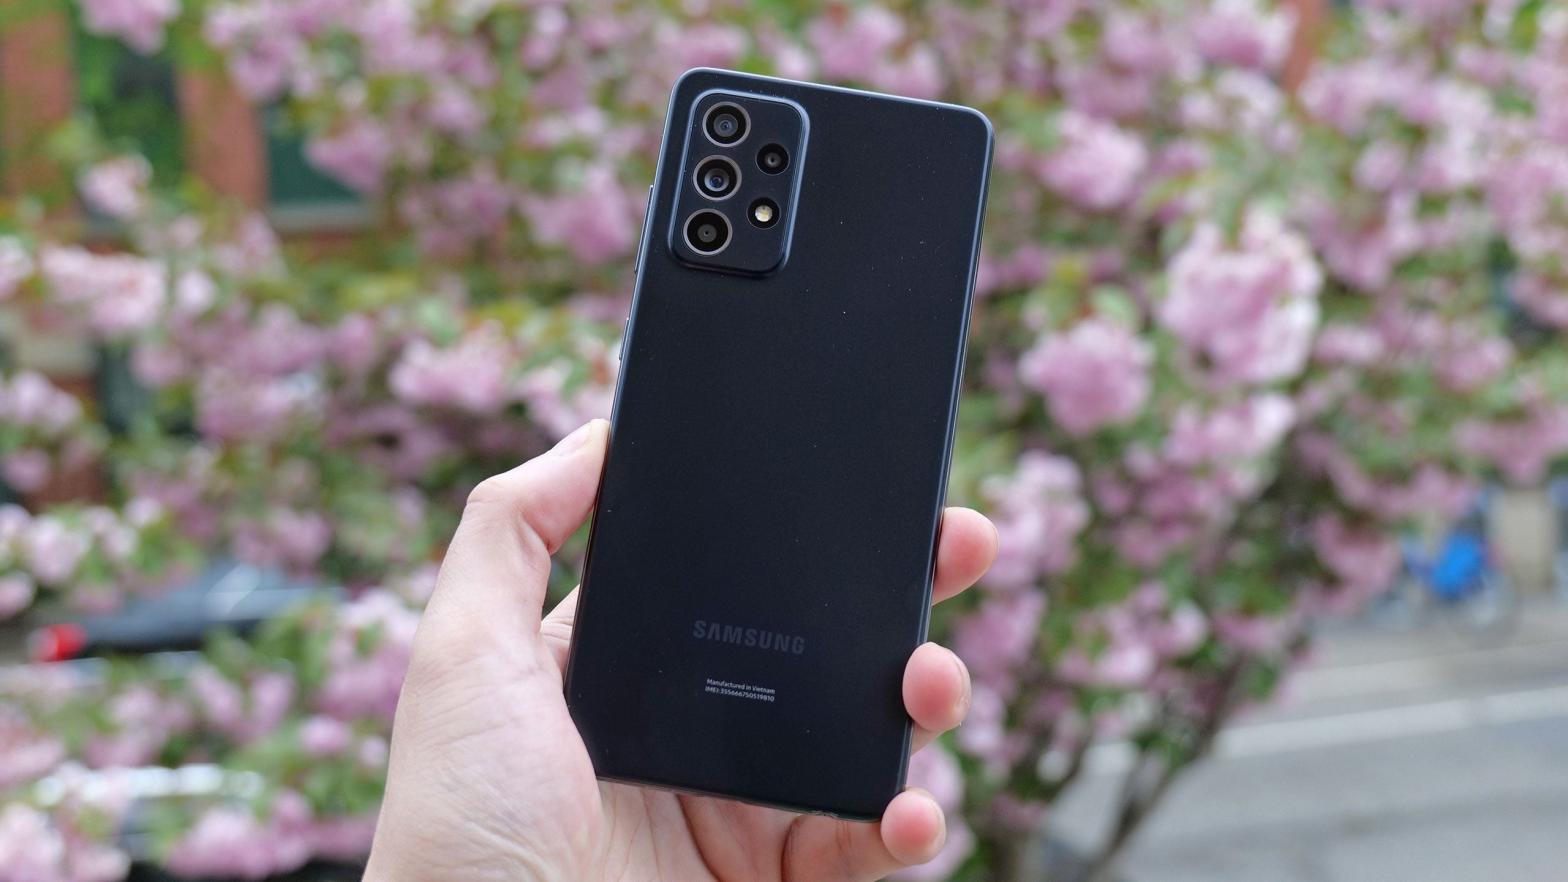 New leaks suggest the upcoming Galaxy A33 will feature a similar design to the Galaxy A52 (above), but will lack headphone jack, which has been a standard feature on Samsung's previous budget phones.  (Photo: Sam Rutherford)